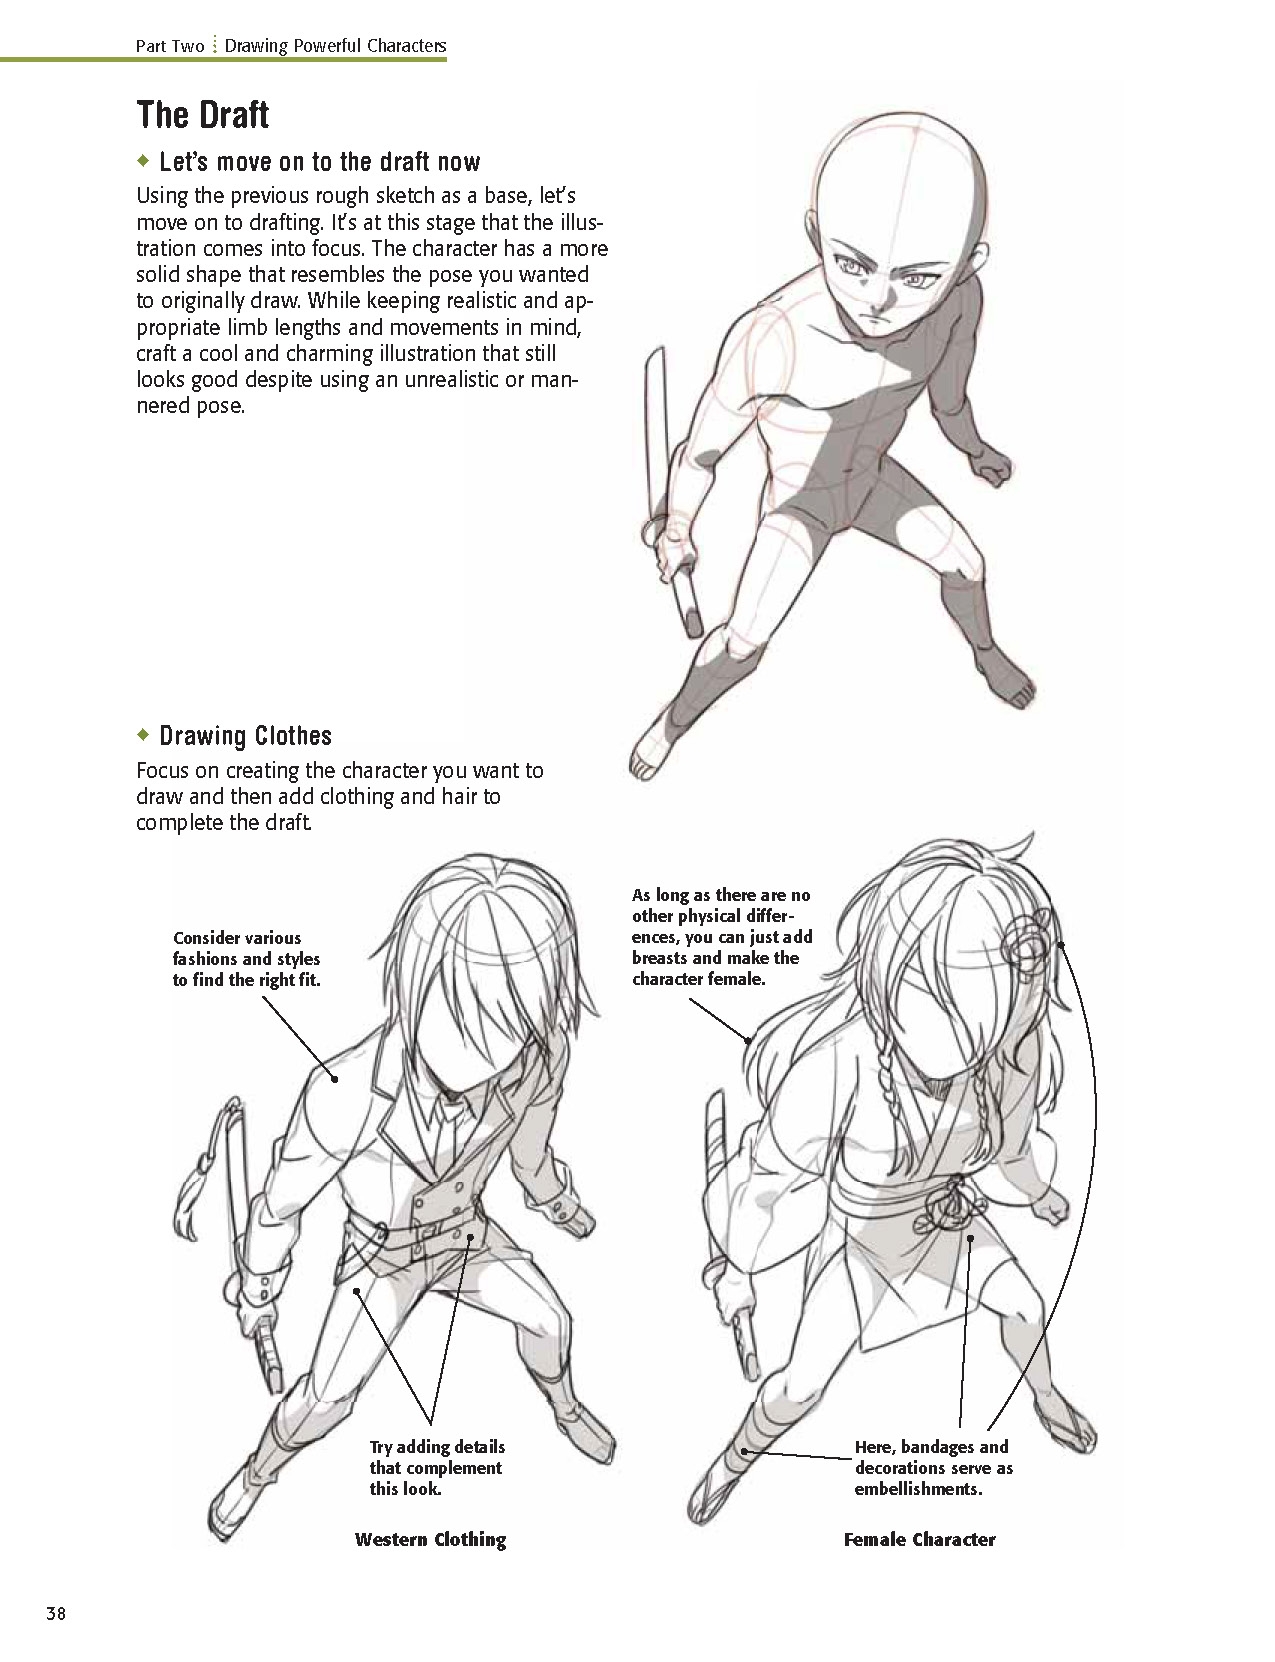 The Complete Guide to Drawing Dynamic Manga Sword Fighters: (An Action-Packed Guide with Over 600 illustrations) 39